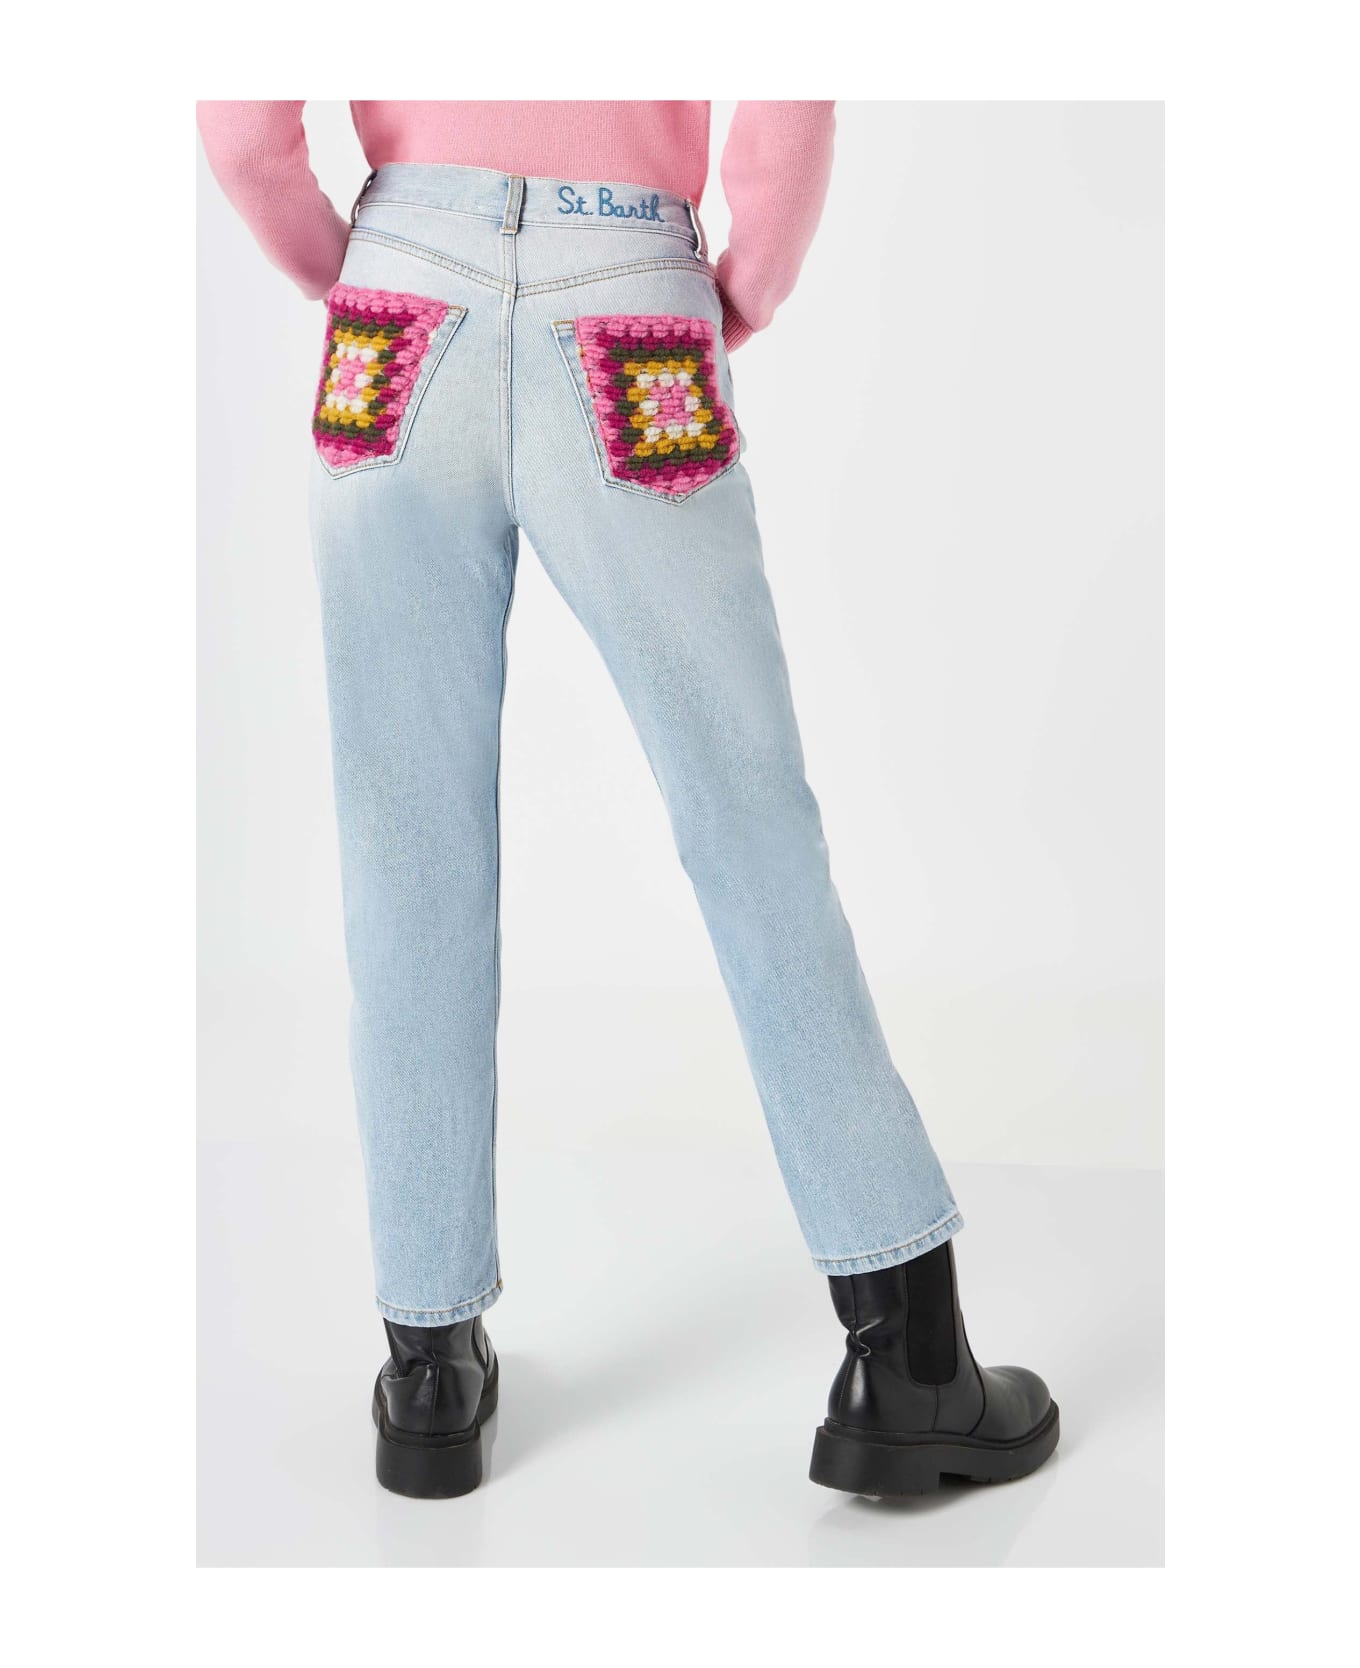 MC2 Saint Barth Woman Jeans With Pockets In Crochet